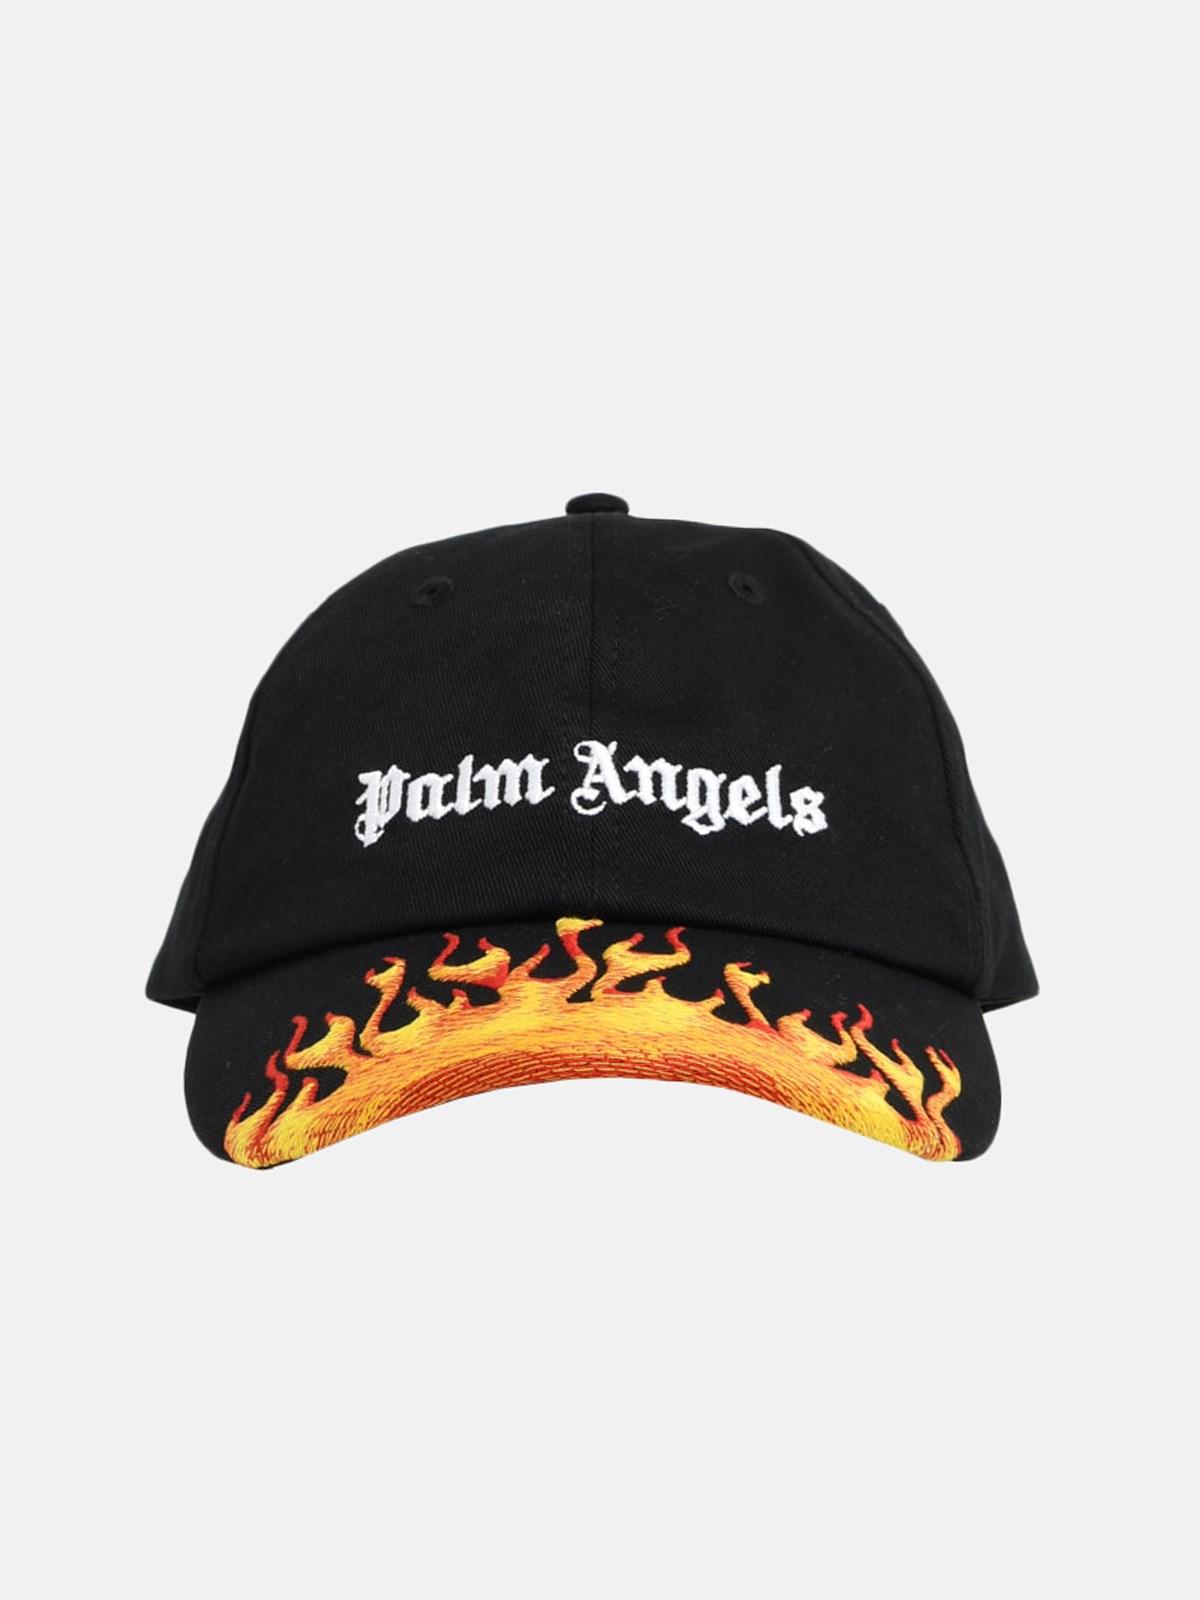 Palm Angels Cotton Flames Baseball Cap in Black,Yellow,Red (Black 